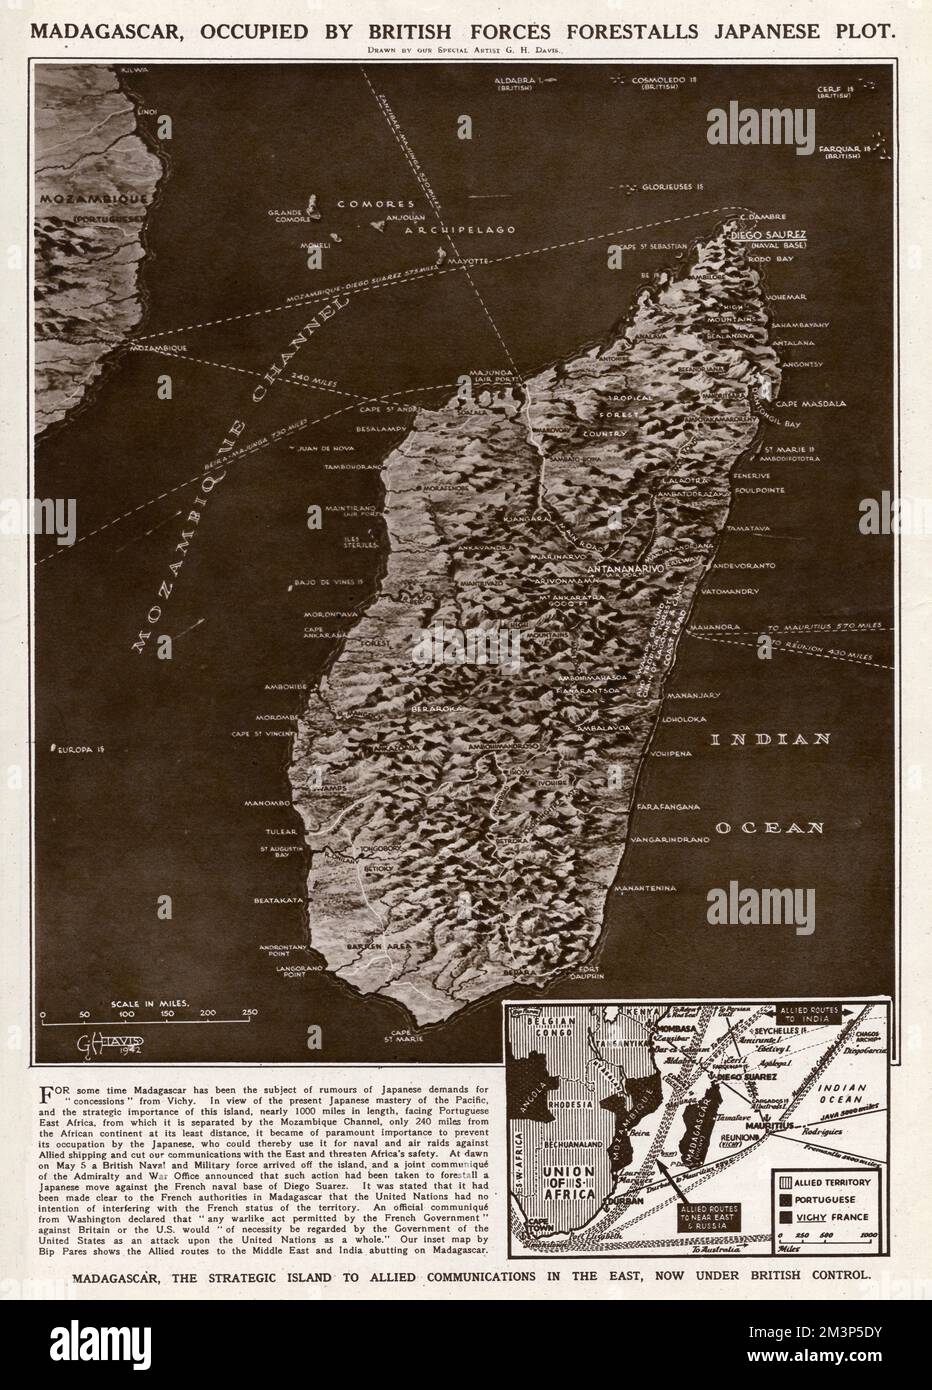 Madagascar, the strategic island to Allied communications in the East, occupied by British forces, forestalls a Japanese plot during the Second World War.  At the time, Madagascar belonged to Vichy France.       Date: 1942 Stock Photo